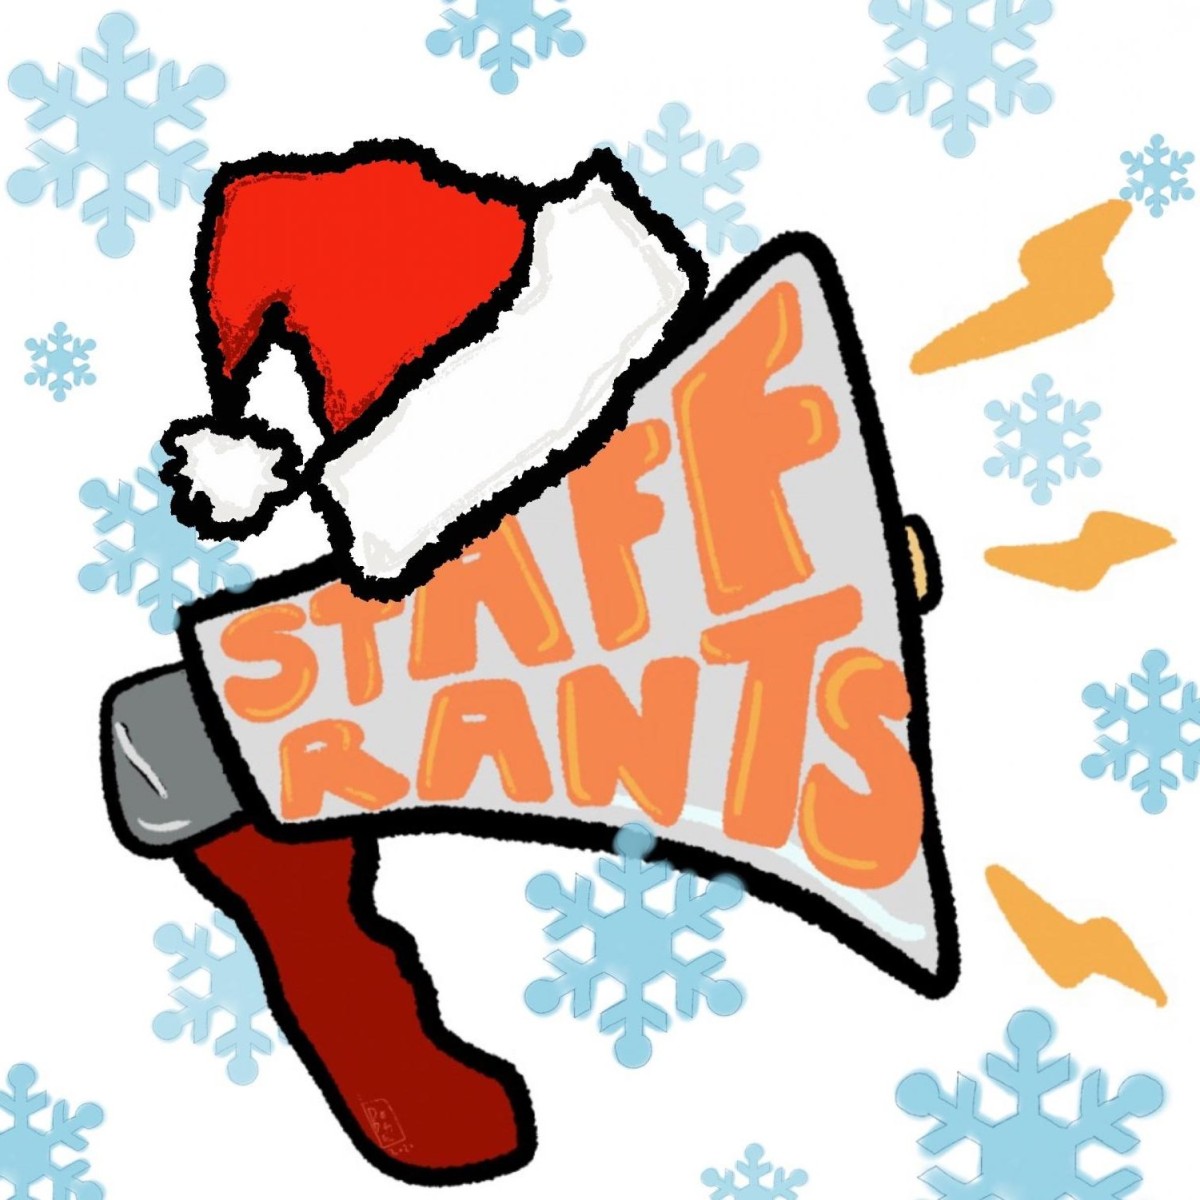 An illustration of a megaphone with the phrase “Staff Rants” written on it. The megaphone wears a red Santa hat and the background is white with blue snowflakes.